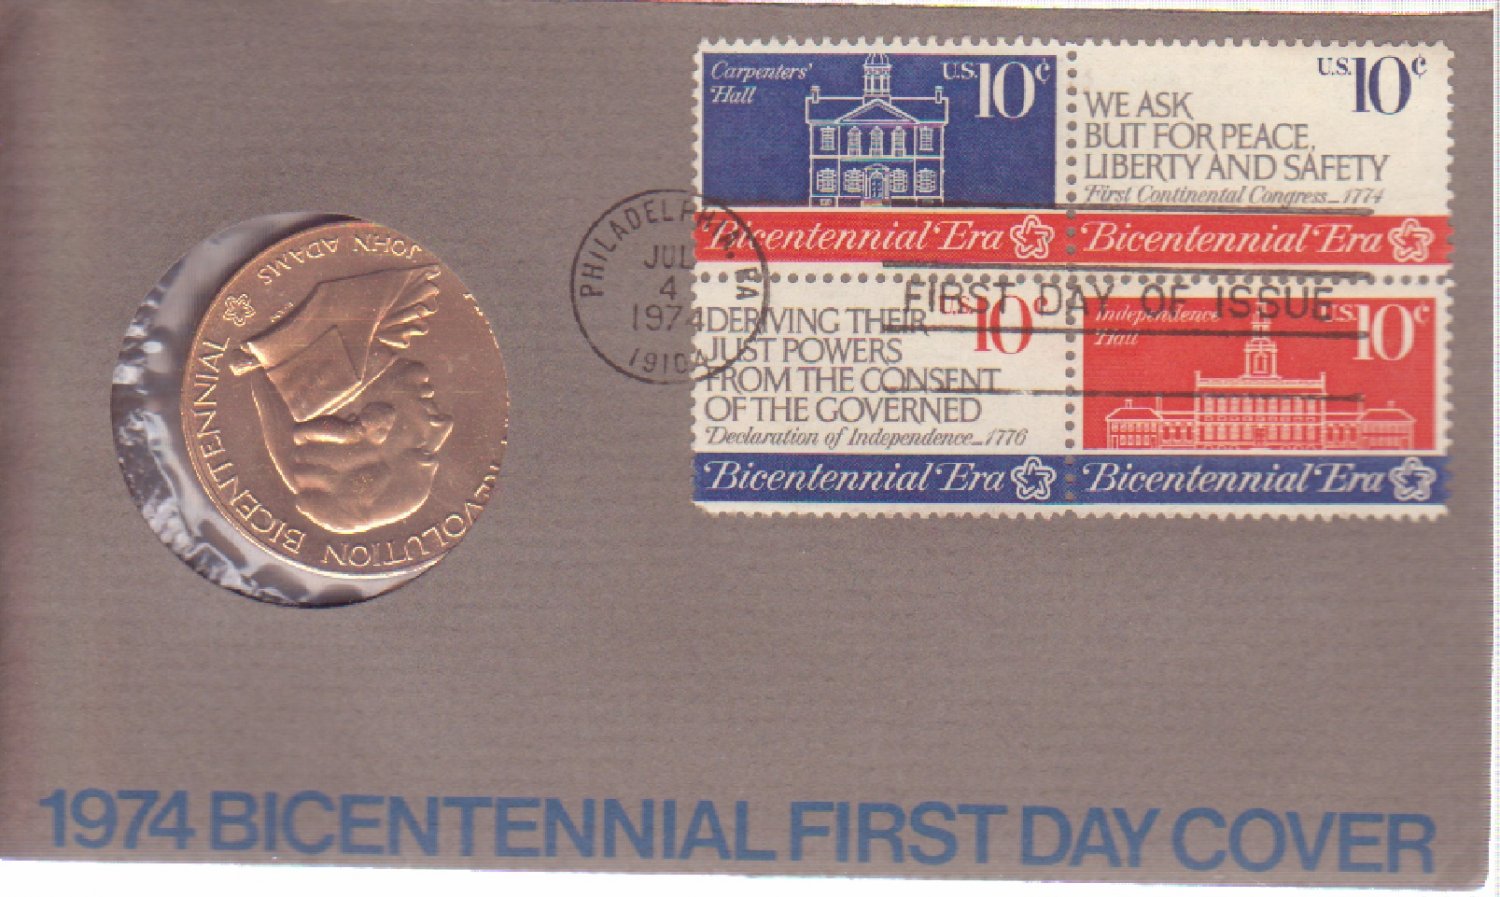 1974 Bicentennial First Day Cover Commemorative Medal & Stamps Lot #2